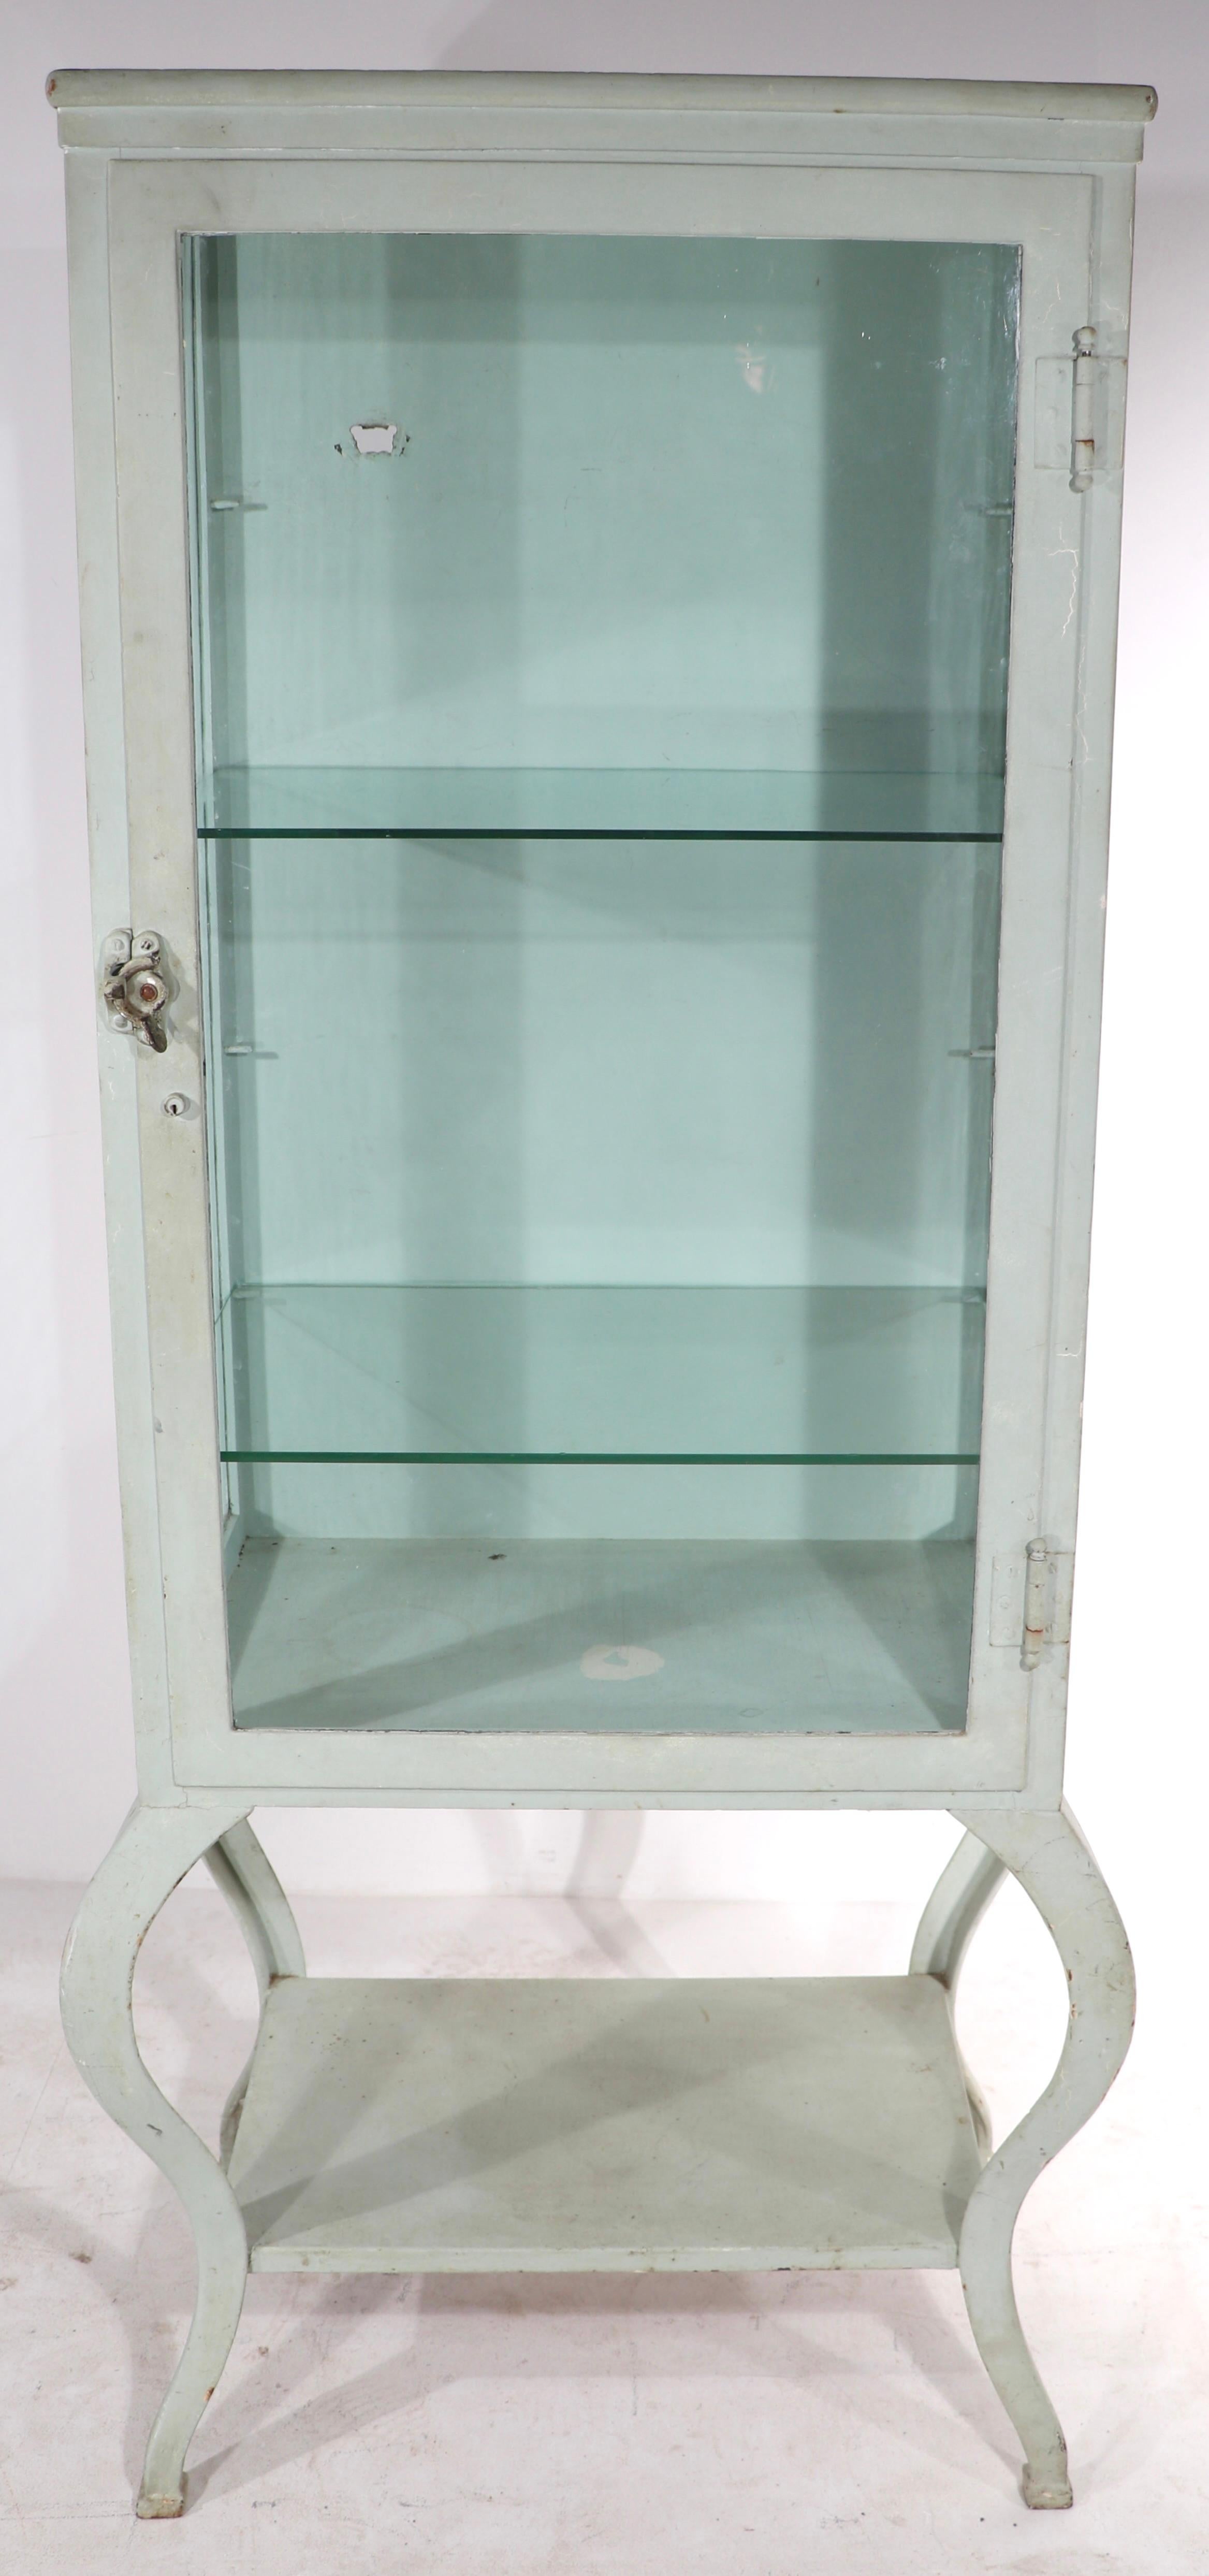 Early 20th C Medical Cabinet Vitrine Display Case 4